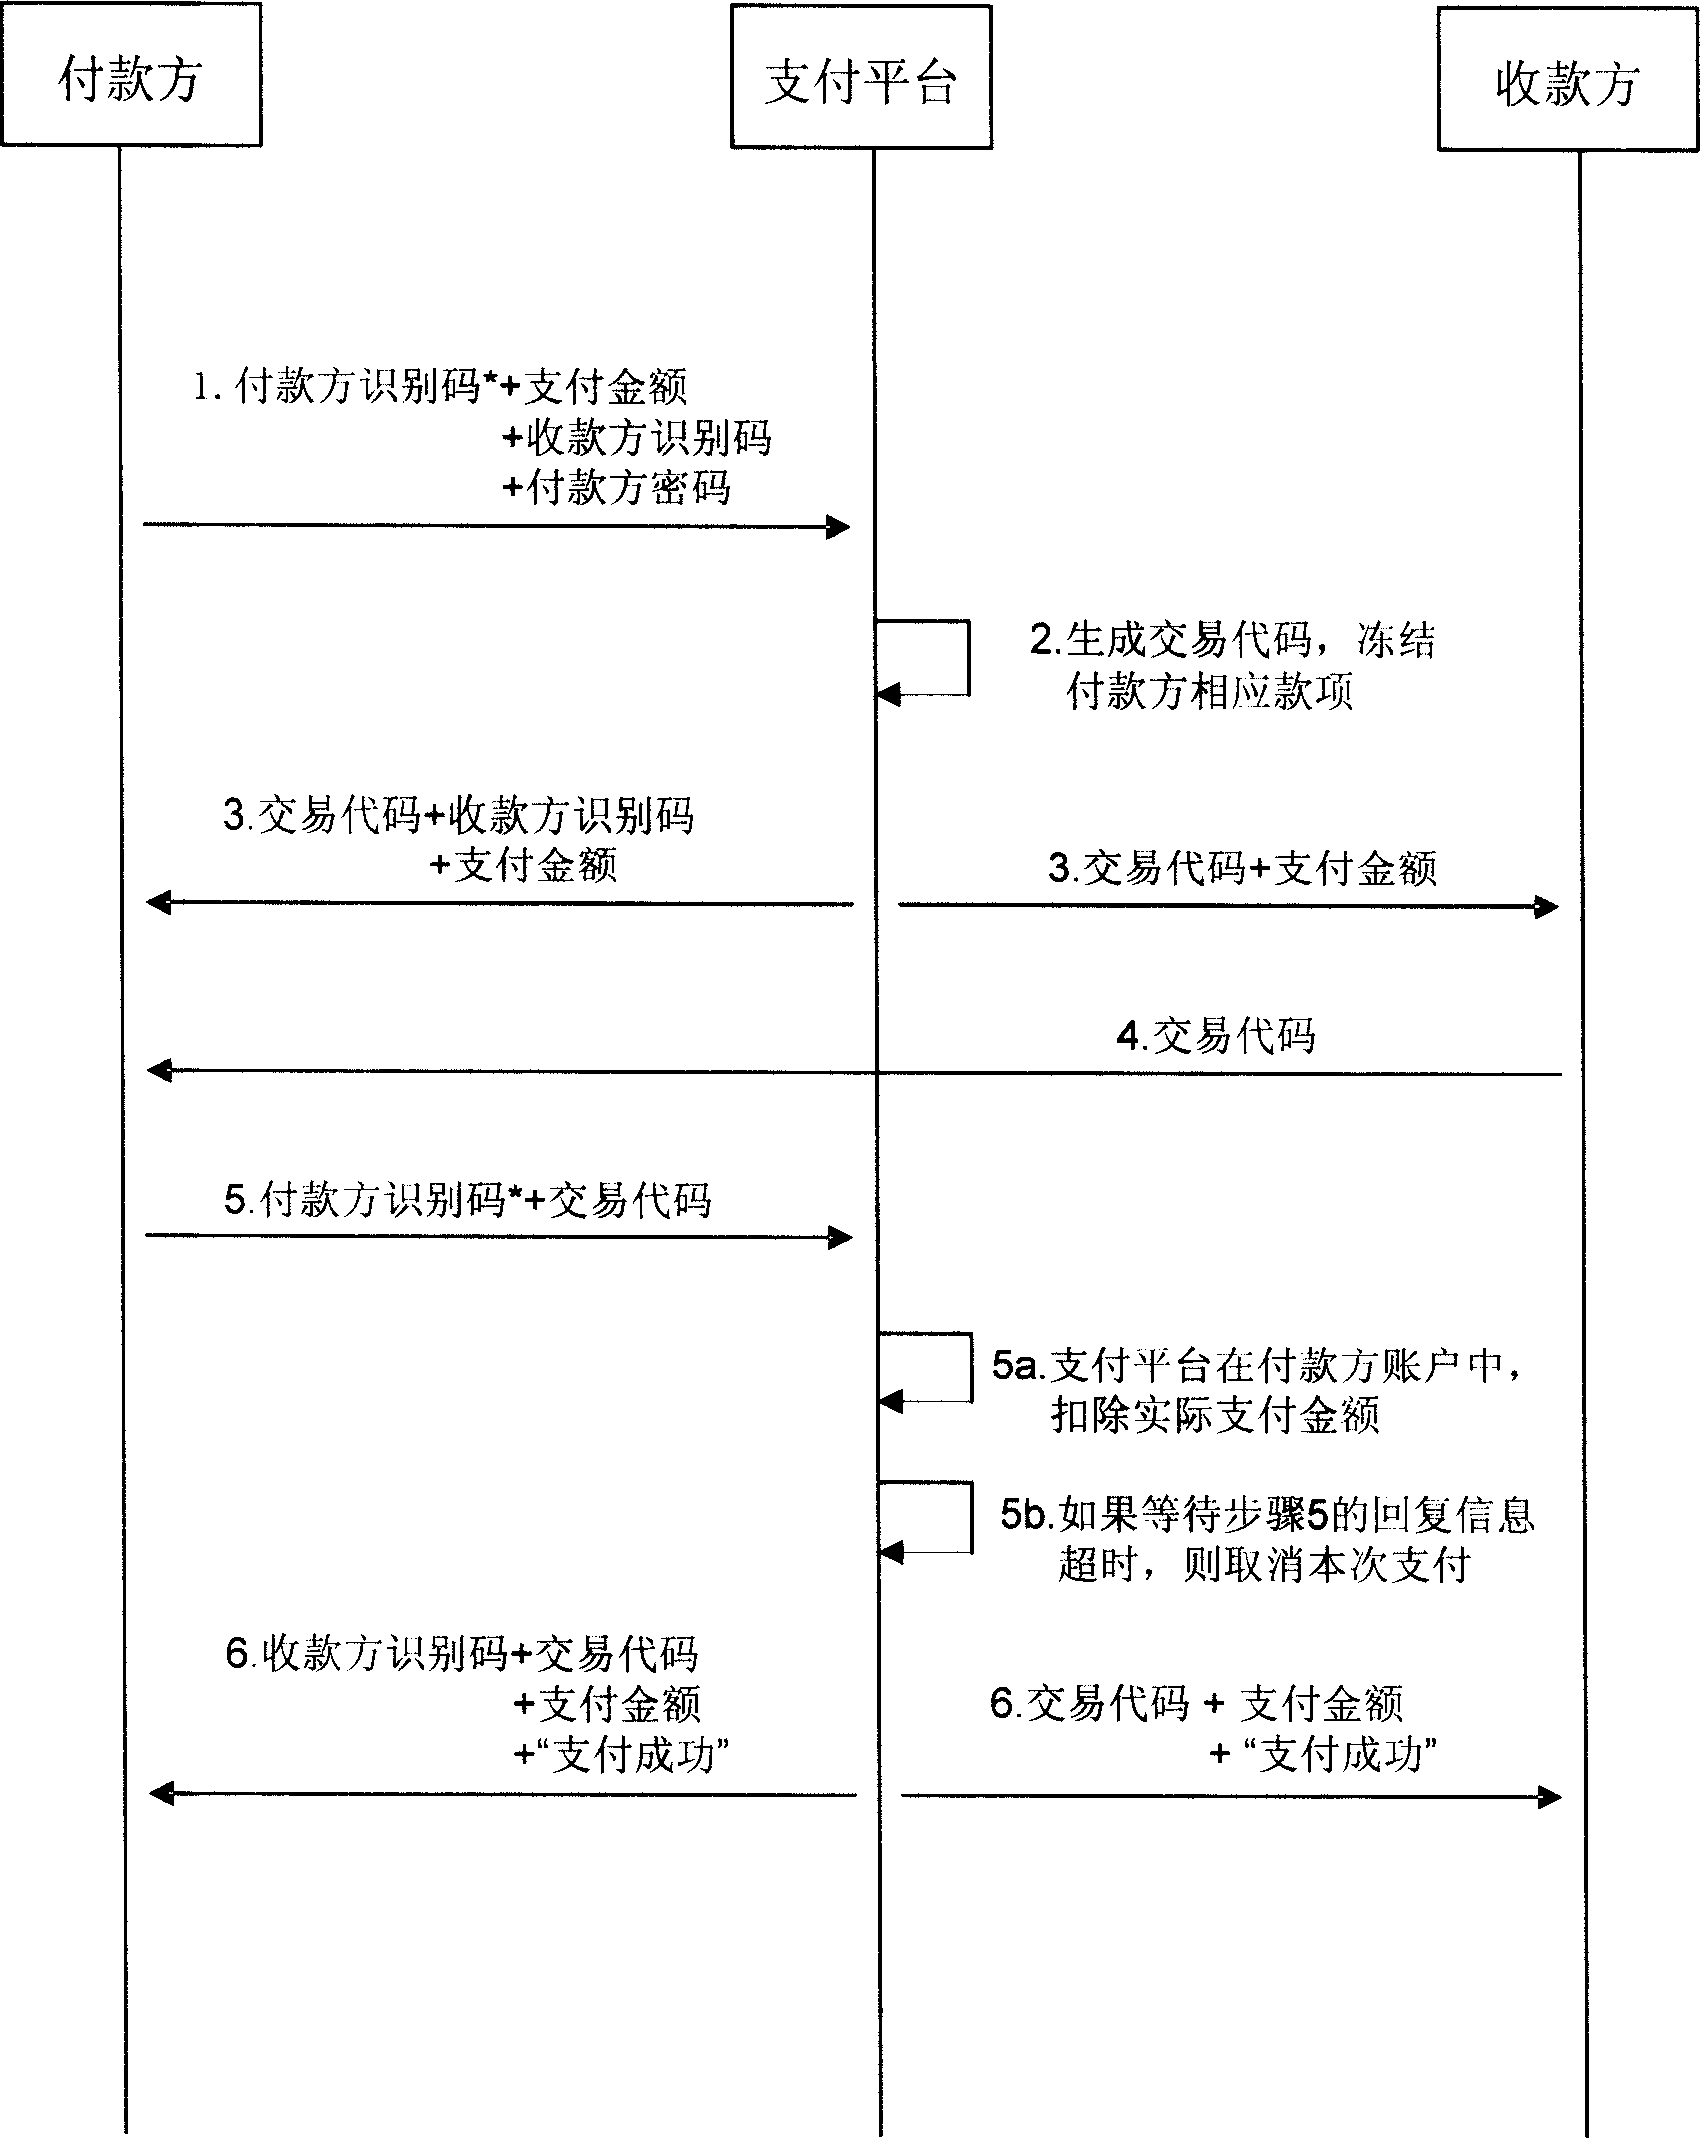 Electronic payment procedure based on transaction code